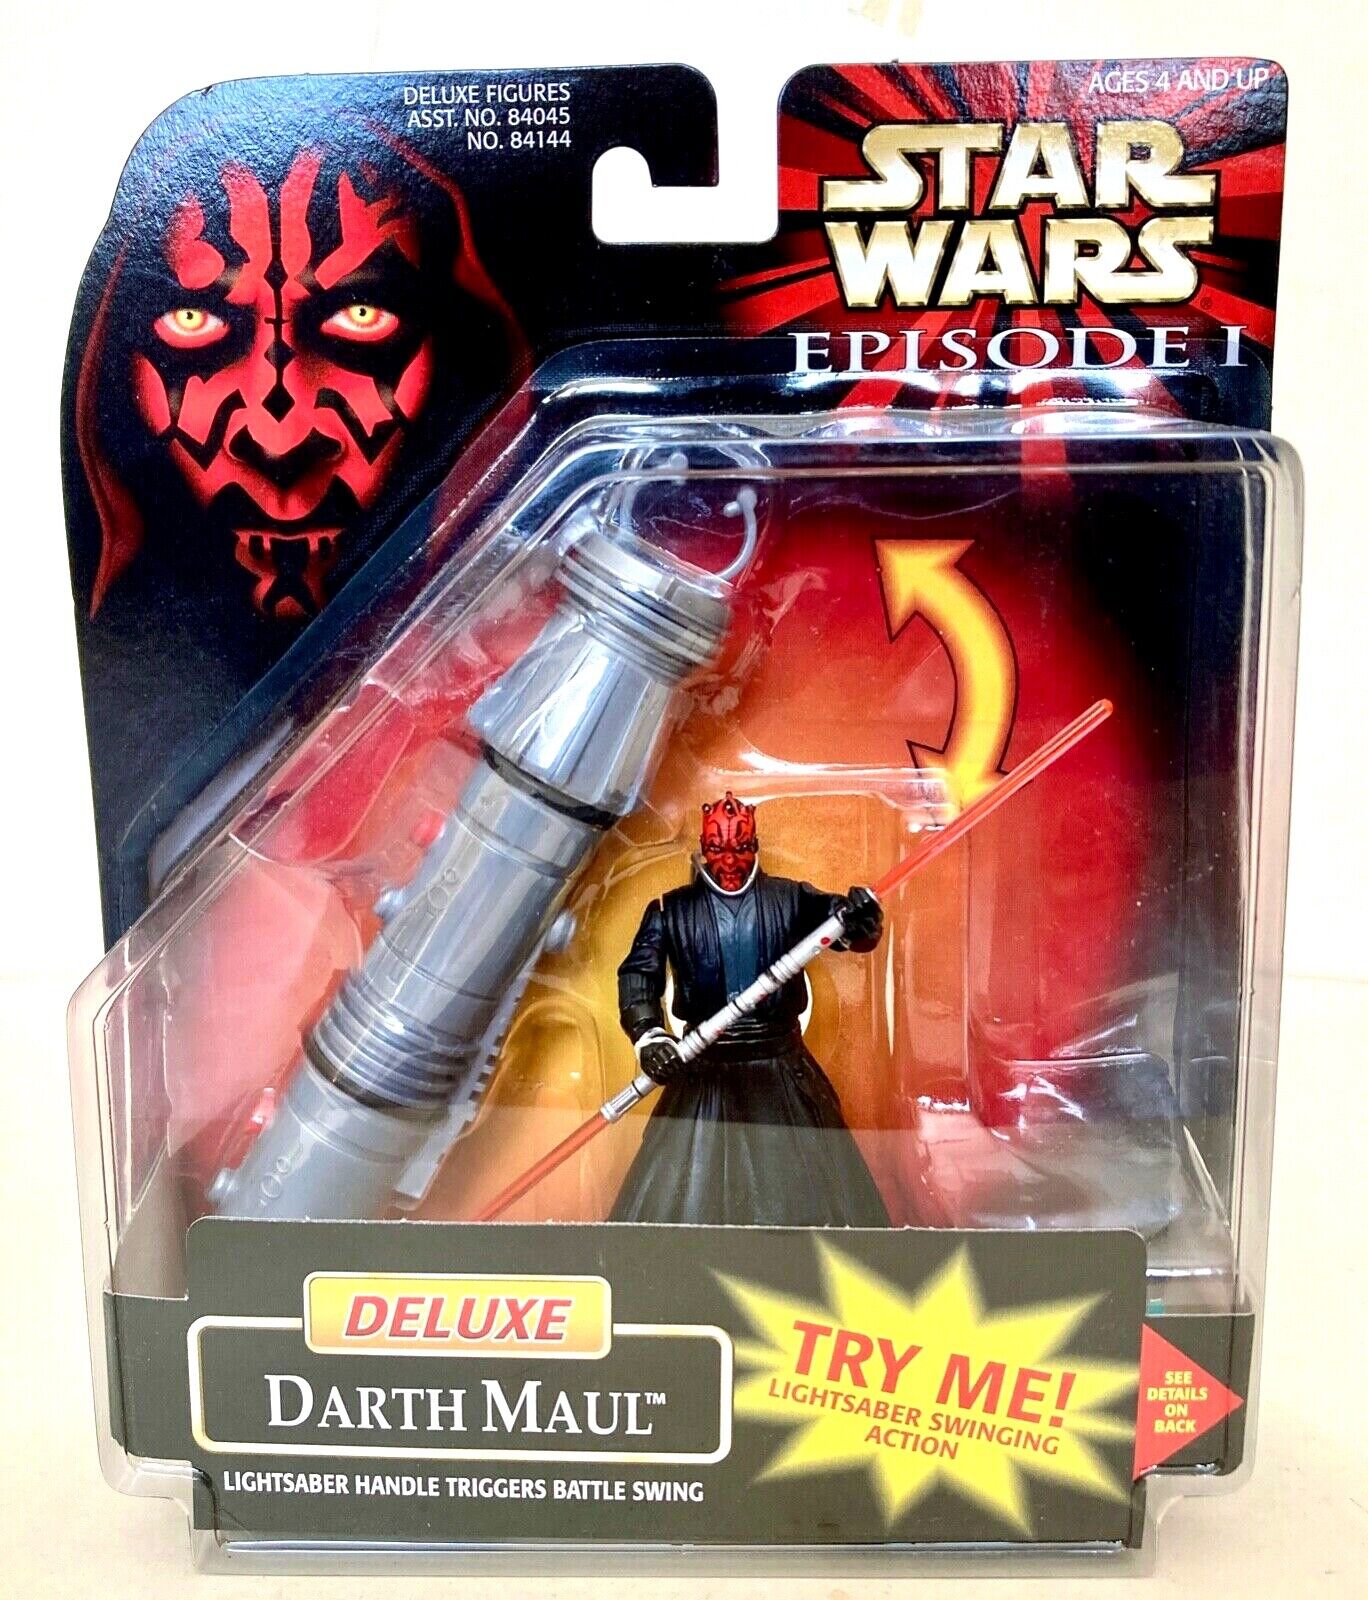 New Star Wars Episode 1 Deluxe Darth Maul With Lightsaber Swinging Action